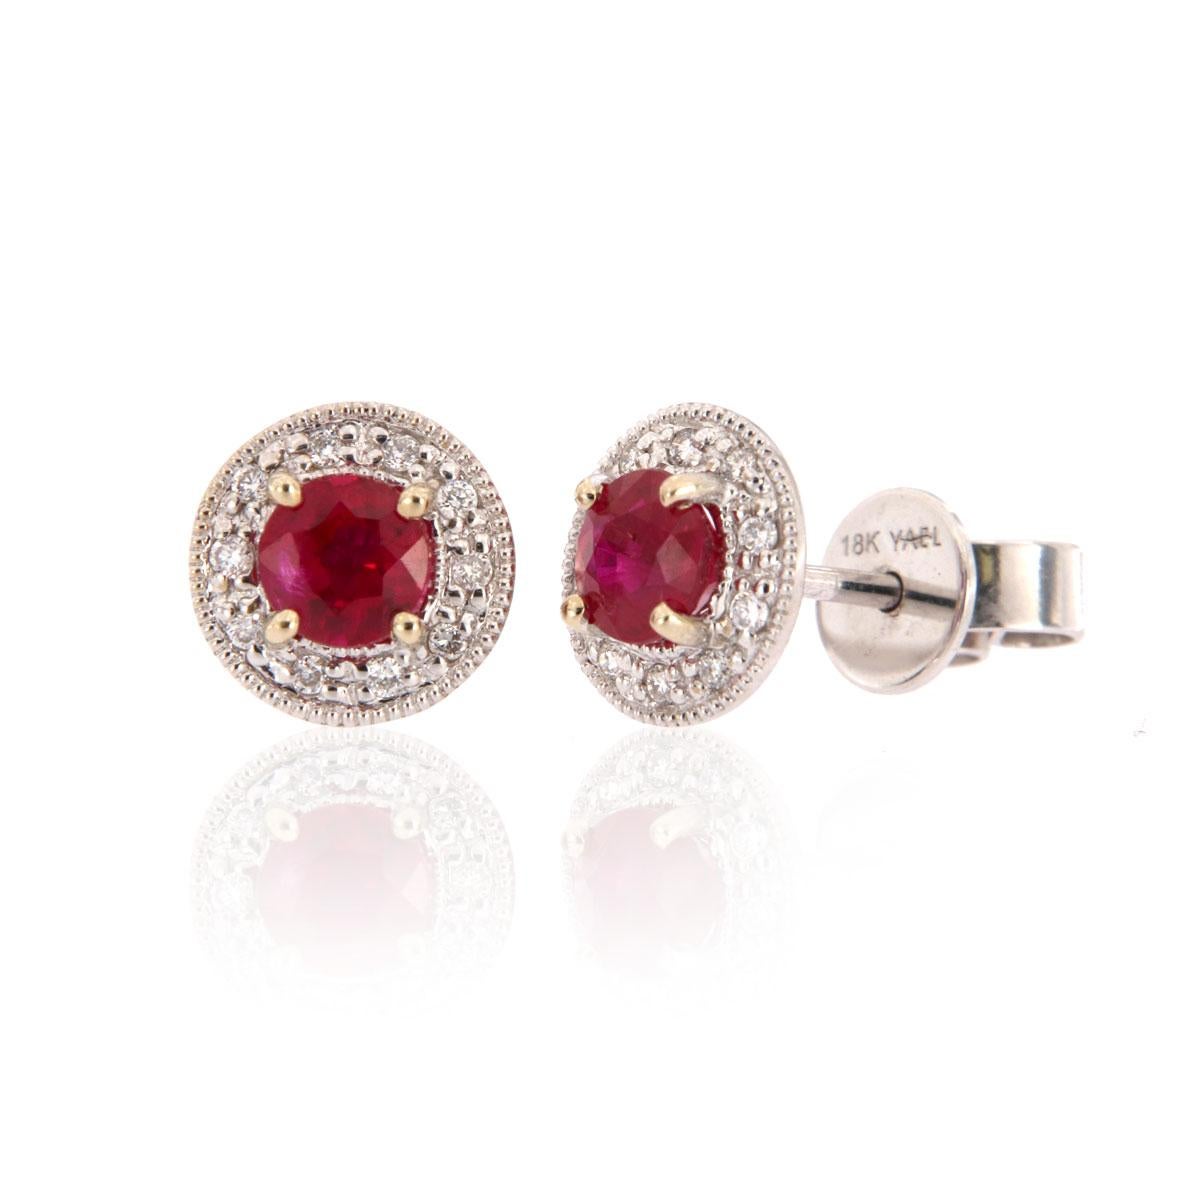 These classic stud earrings feature a 0.80-carat total weight of round shape Rubies in Exceptional quality surrounded by a halo of full-cut diamonds

Product details: 

Center Gemstone Type: Ruby
Center Gemstone Carat Weight: 0.8
Center Gemstone